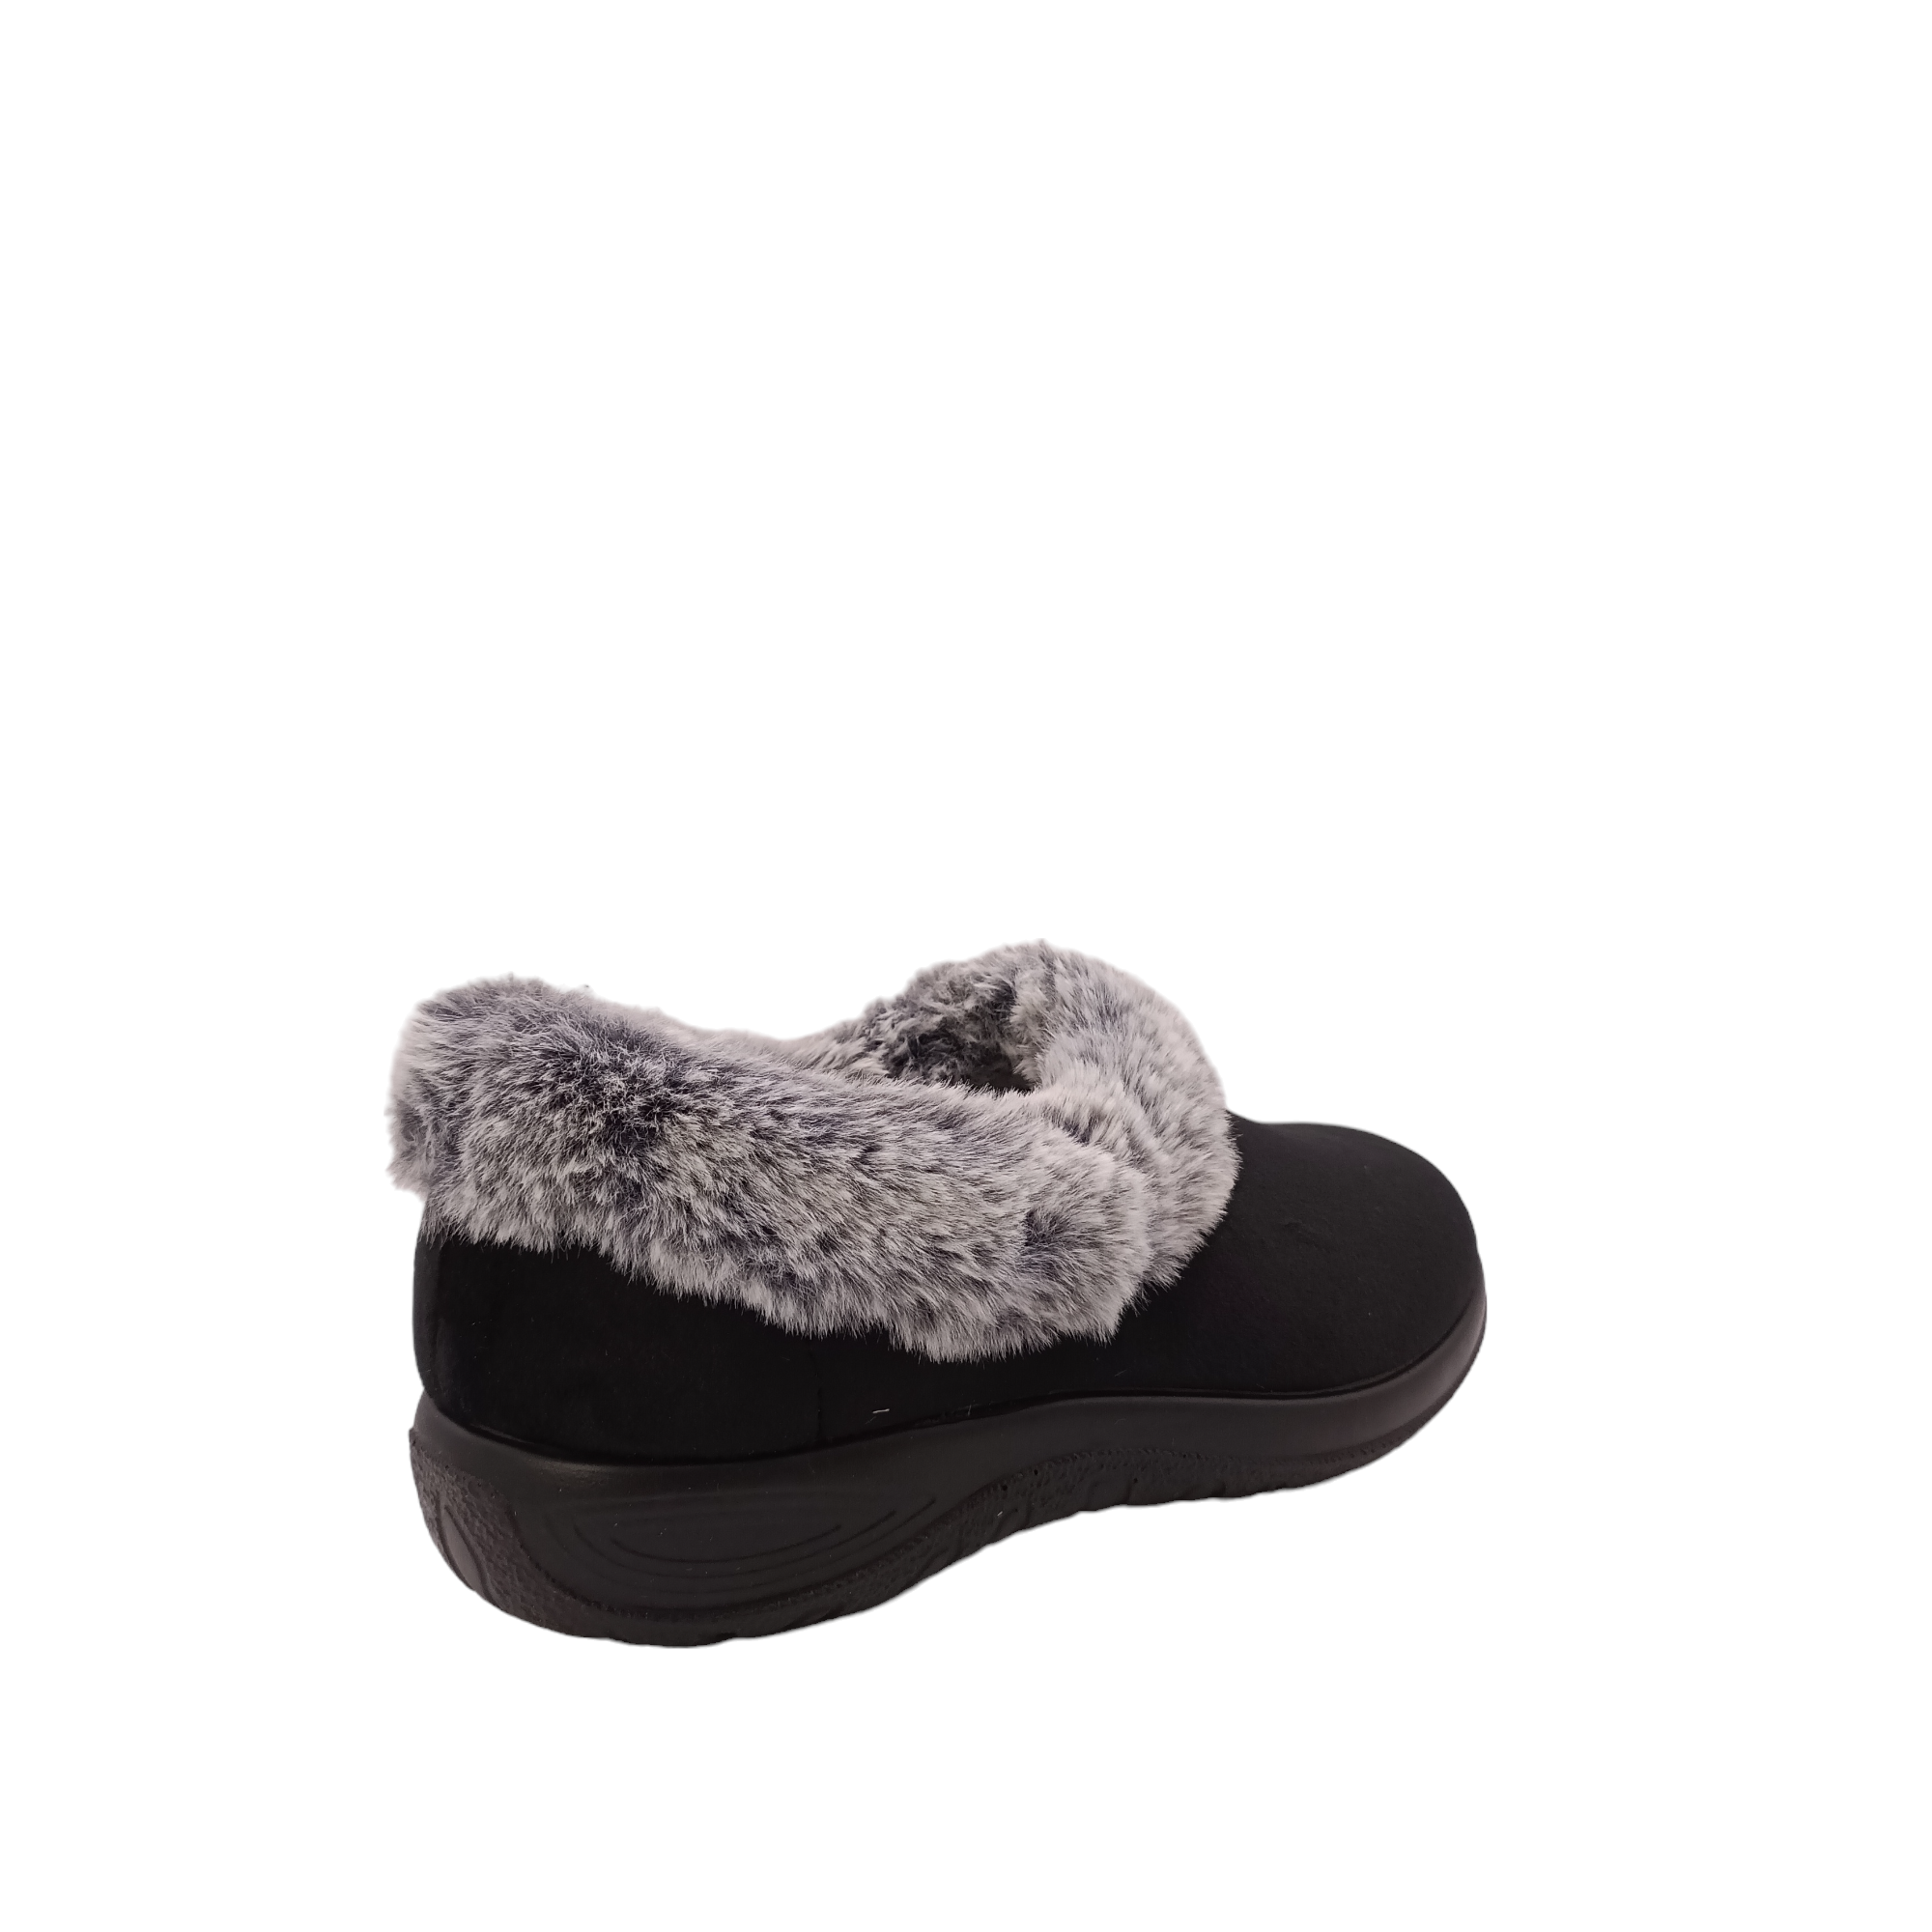 Shop Pippa Fly Flot - with shoe&me - from Fly Flot - Slippers - Slipper, Winter